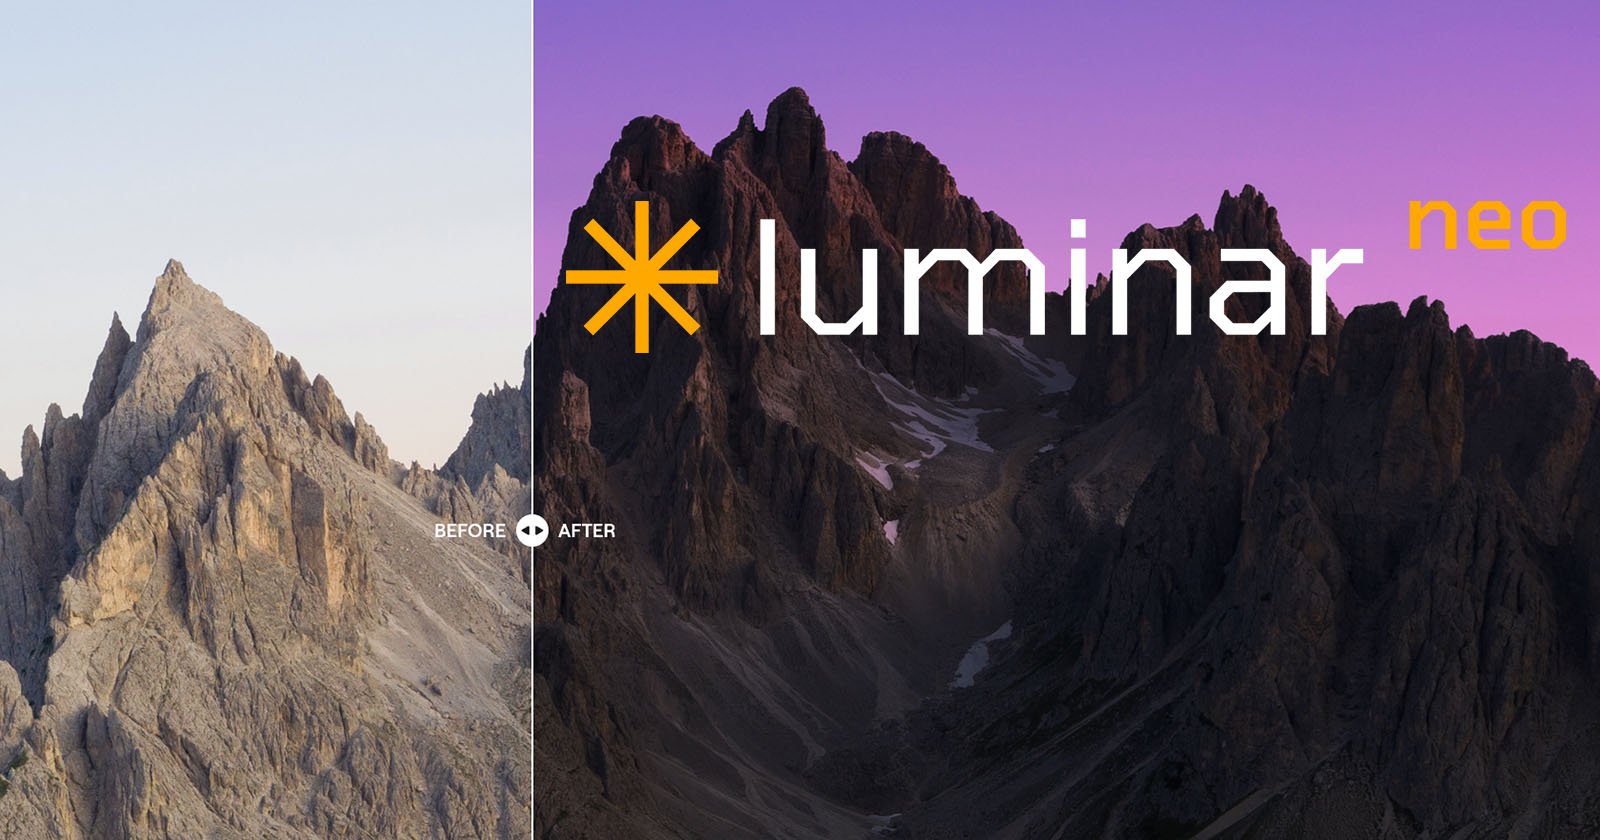 Luminar Neo Gets an Improved UI and Major New Photo Editing Features